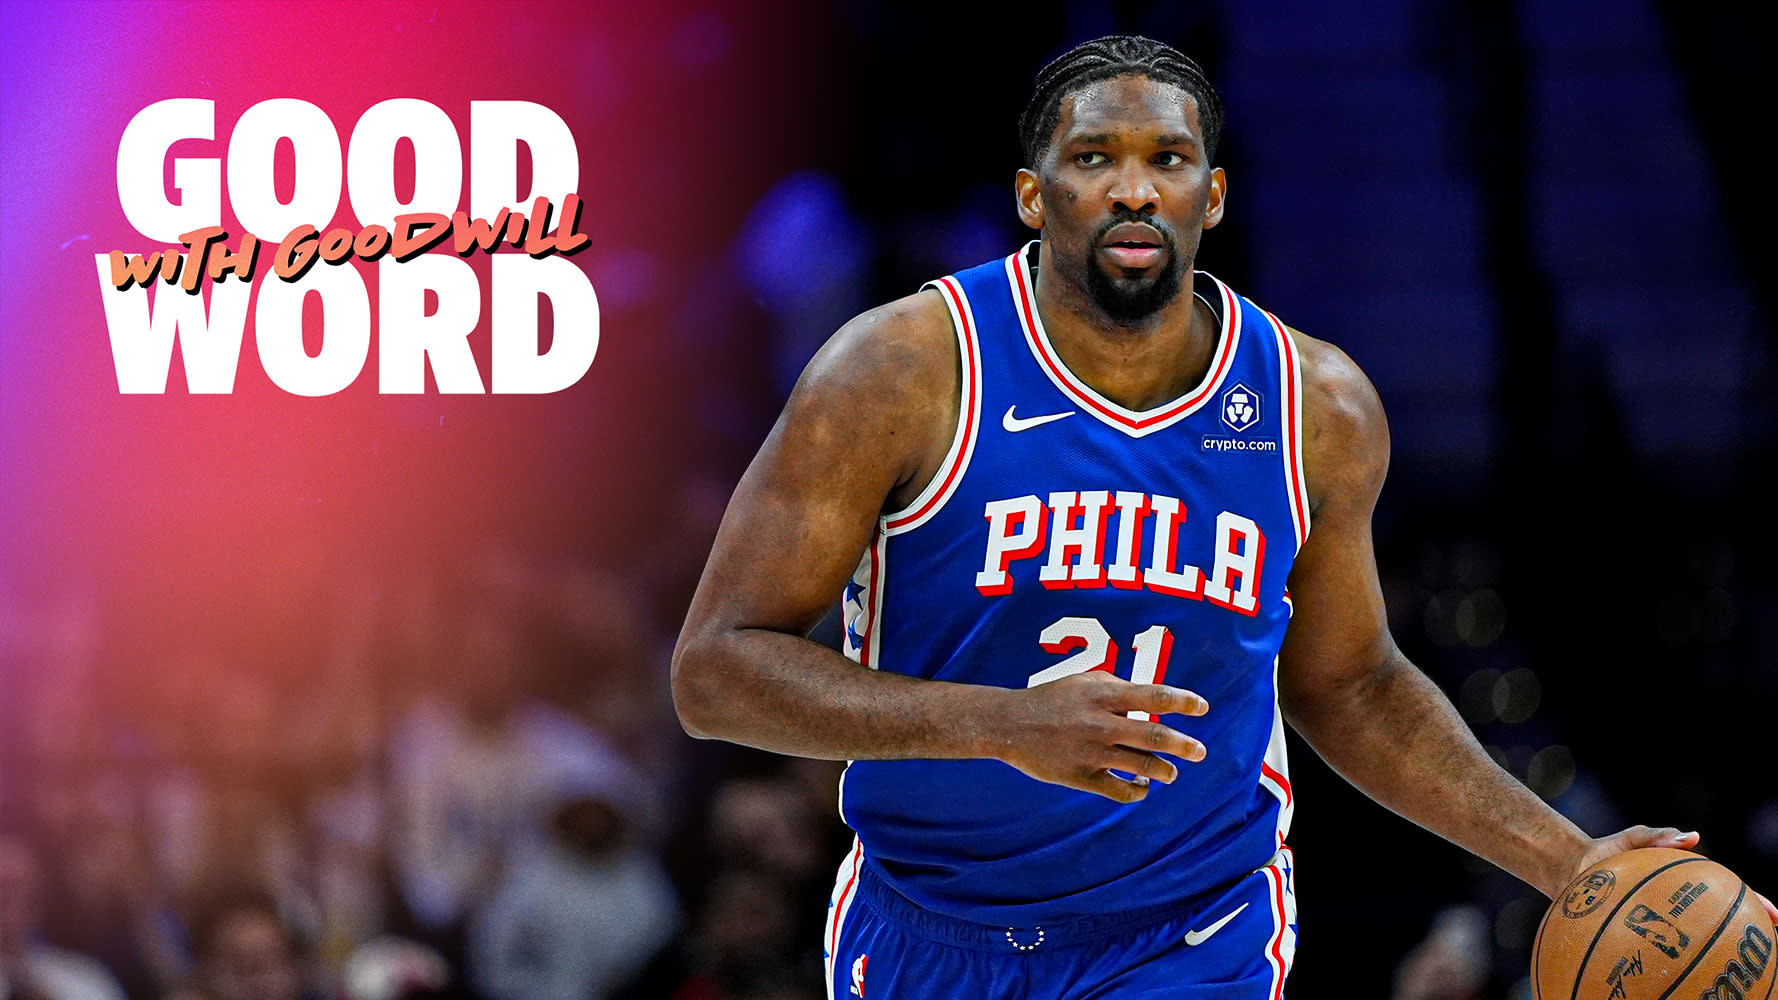 Embiid looks sharp vs. OKC, Curry struggling with physicality & Luka's MVP case | Good Word with Goodwill